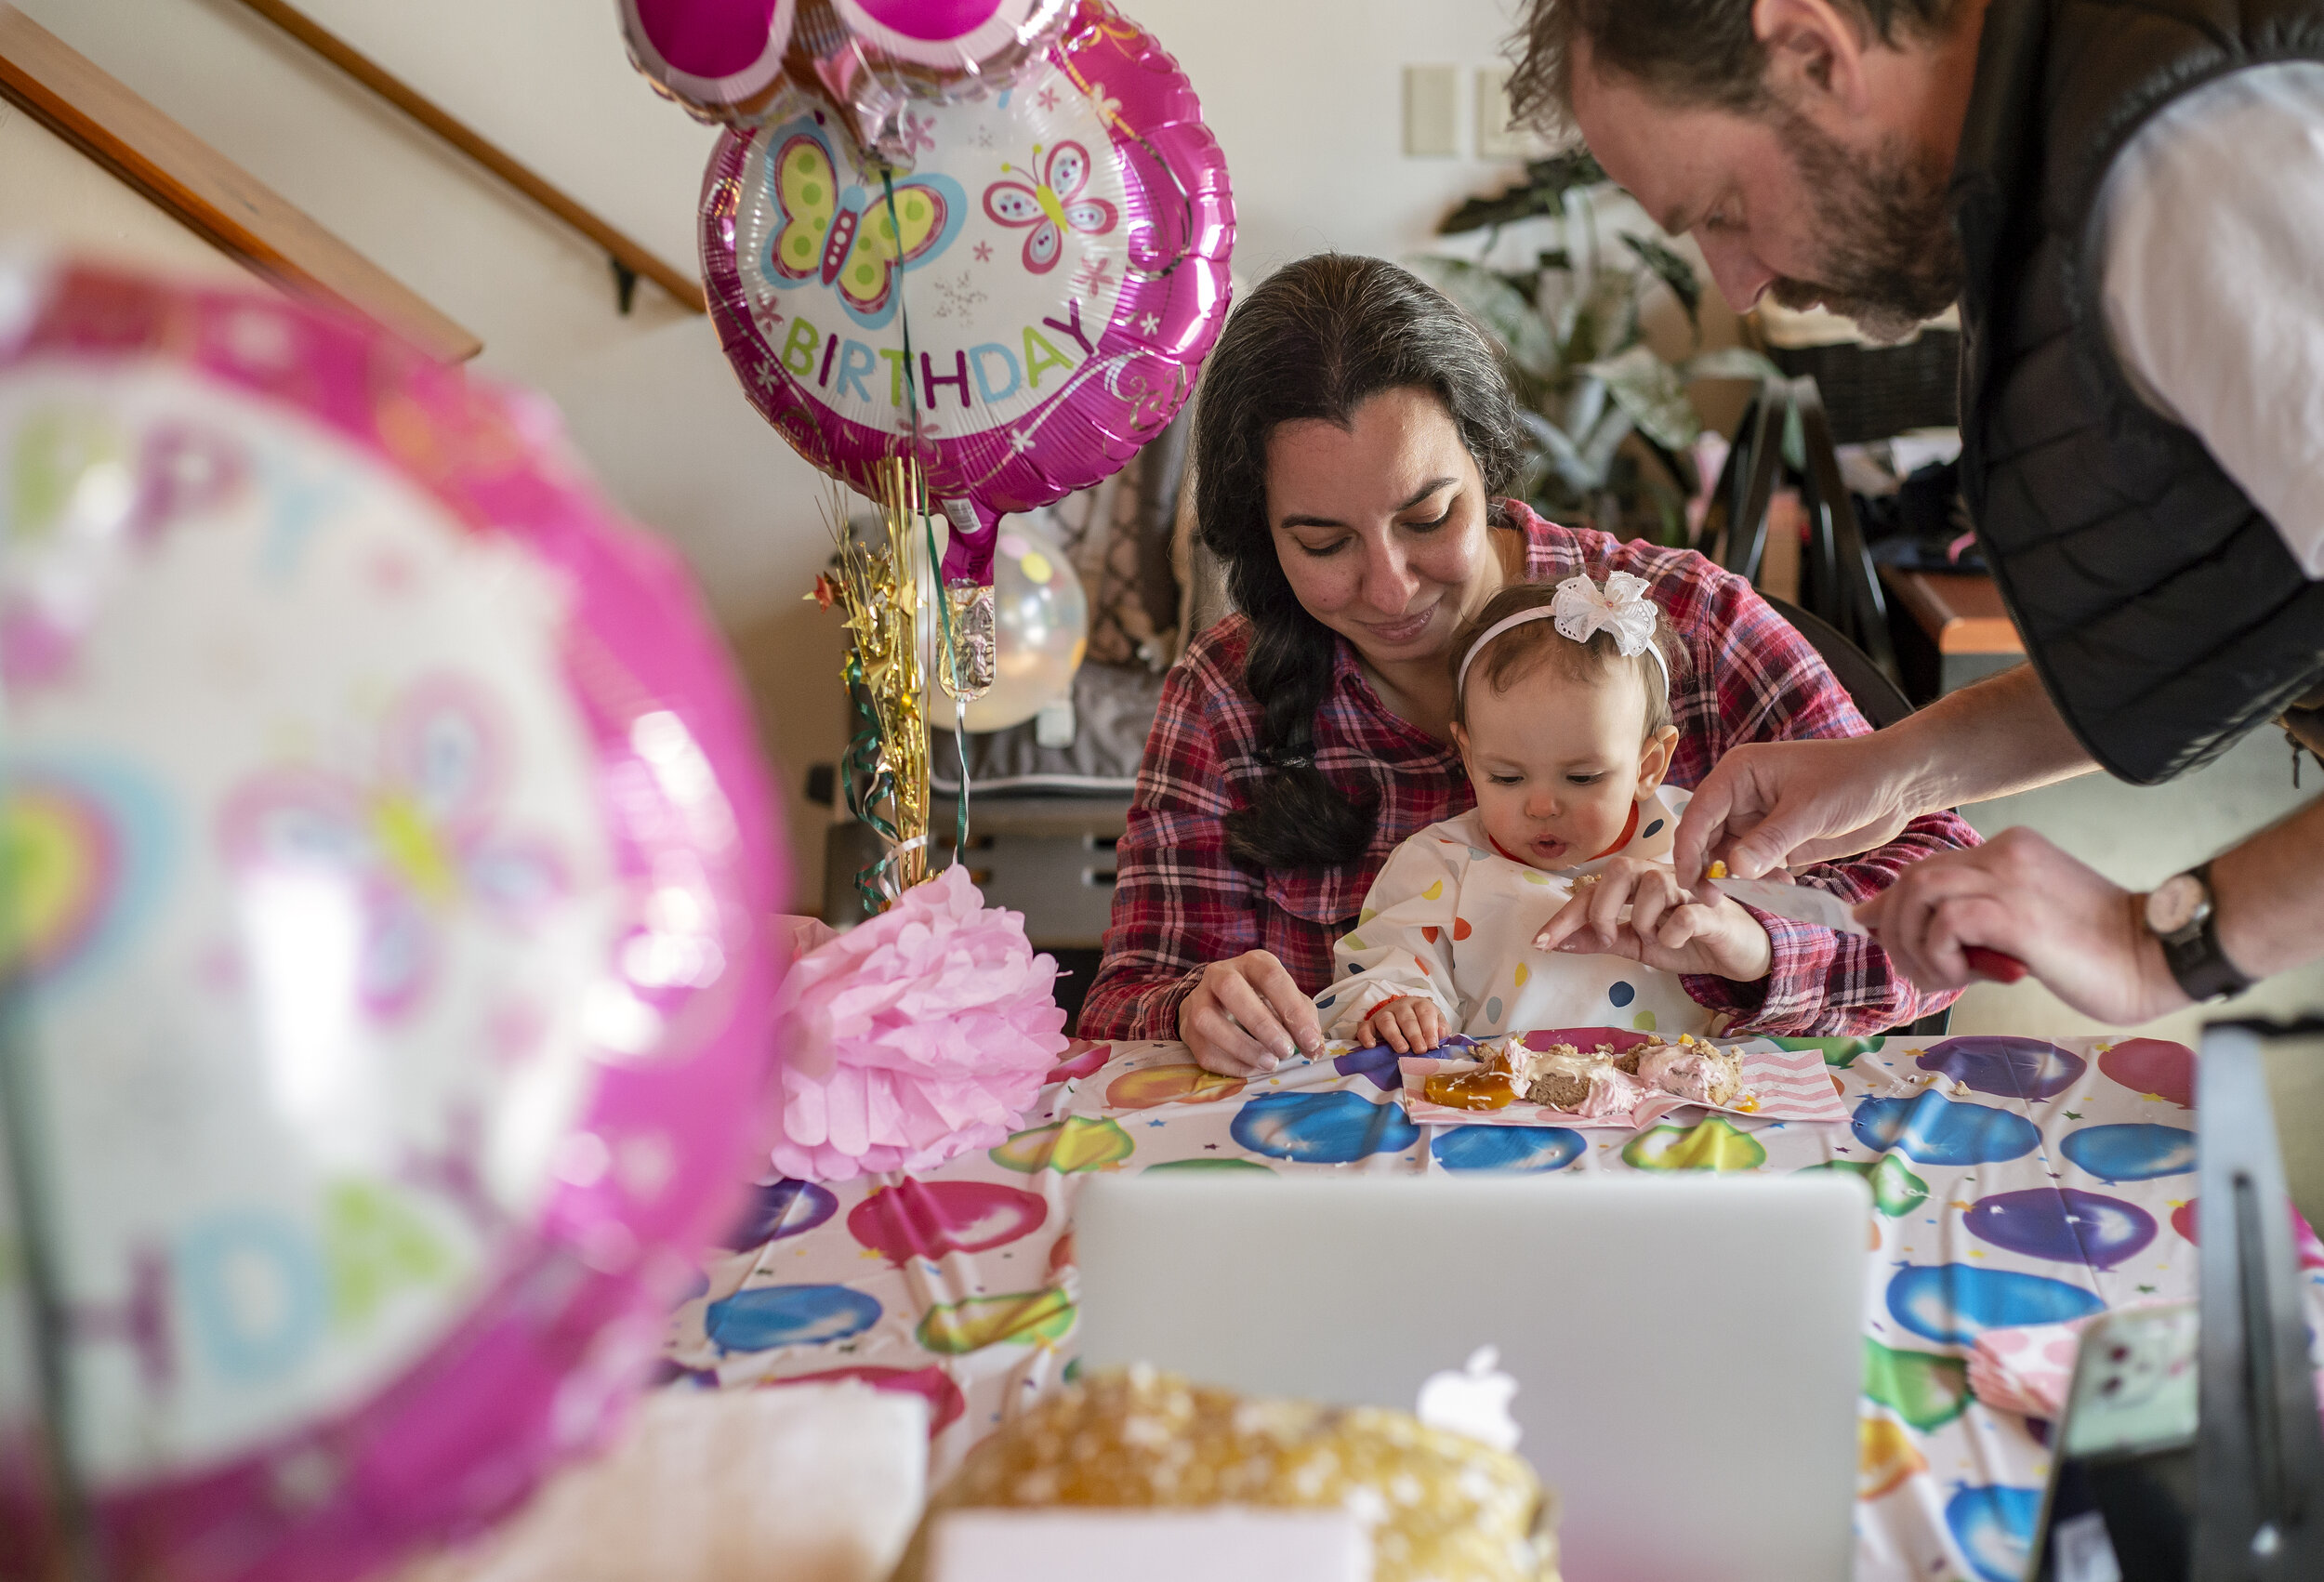  Metcalf and Souza help Isadora eat a piece of birthday cake that Souza made while friends and family celebrate her first birthday via Zoom call on March 6, 2021.  